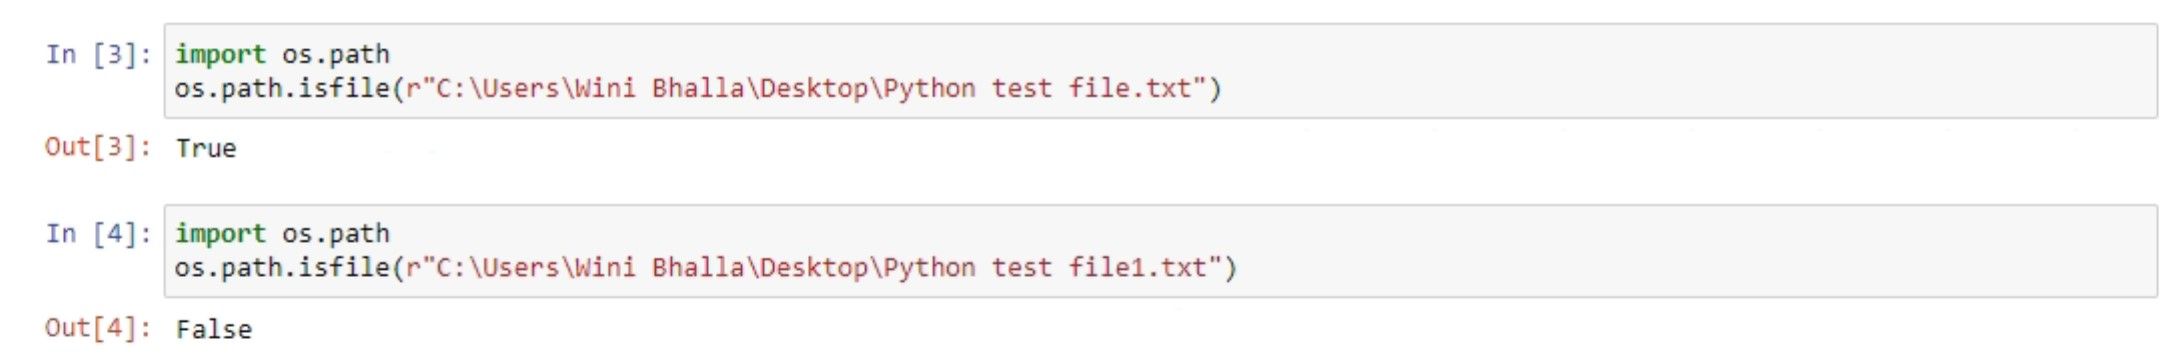 Using os.path.isfile(path) in Python to check a file's status